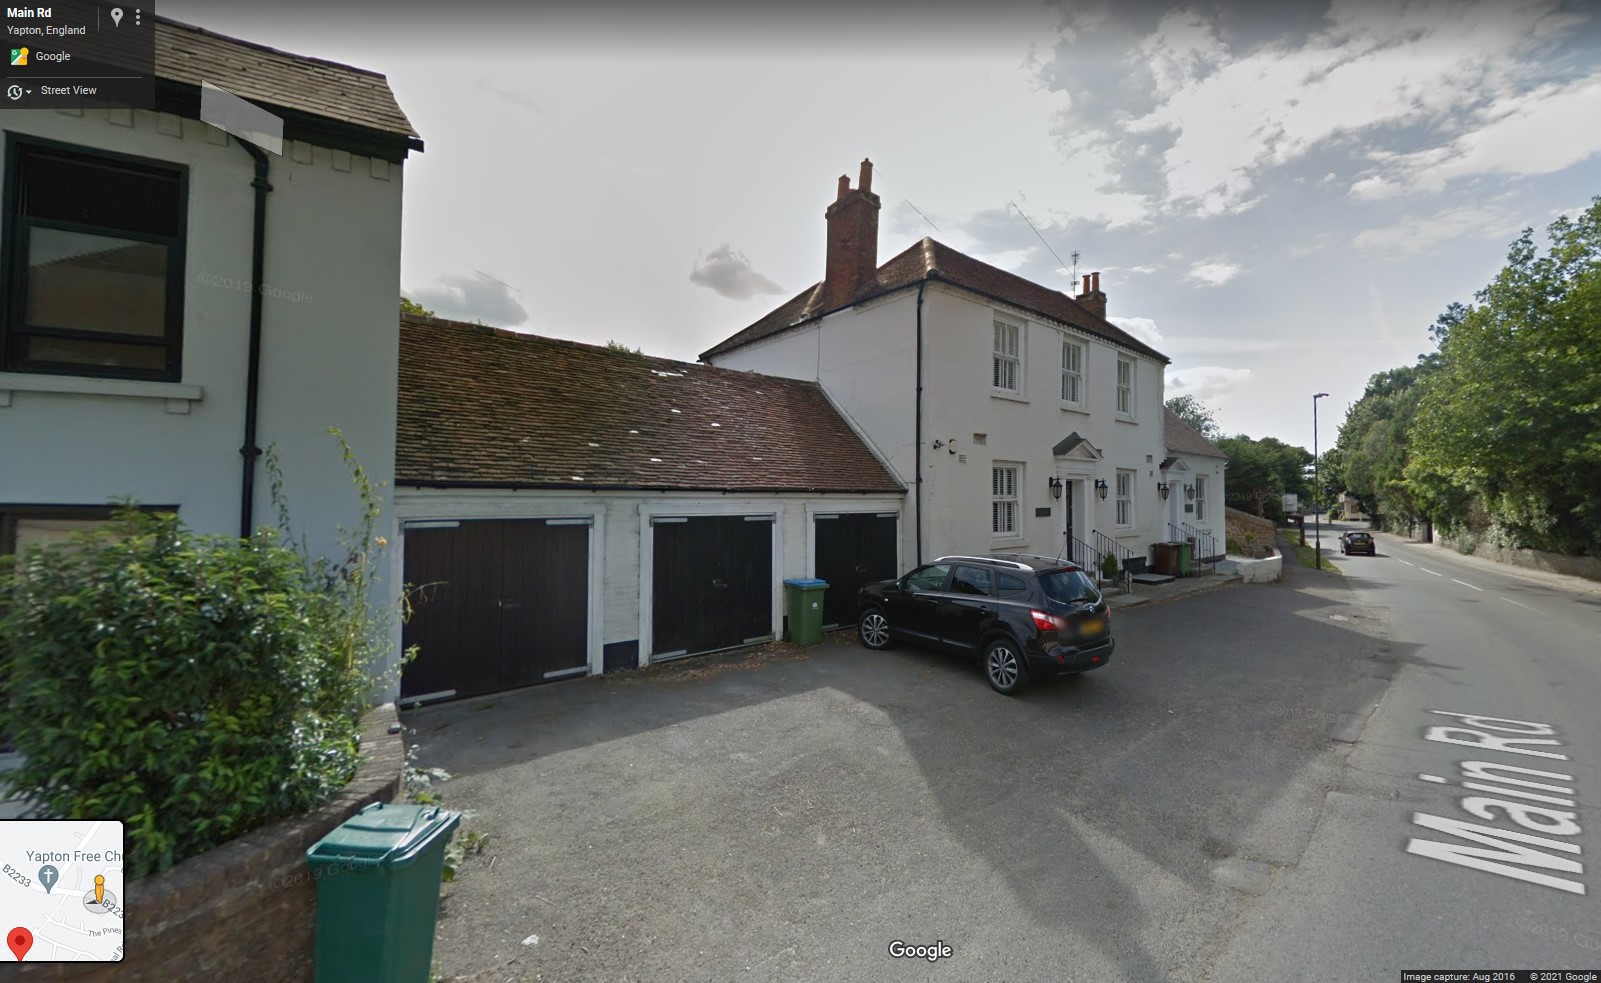 Main Road, Yapton, Sussex - click image to return